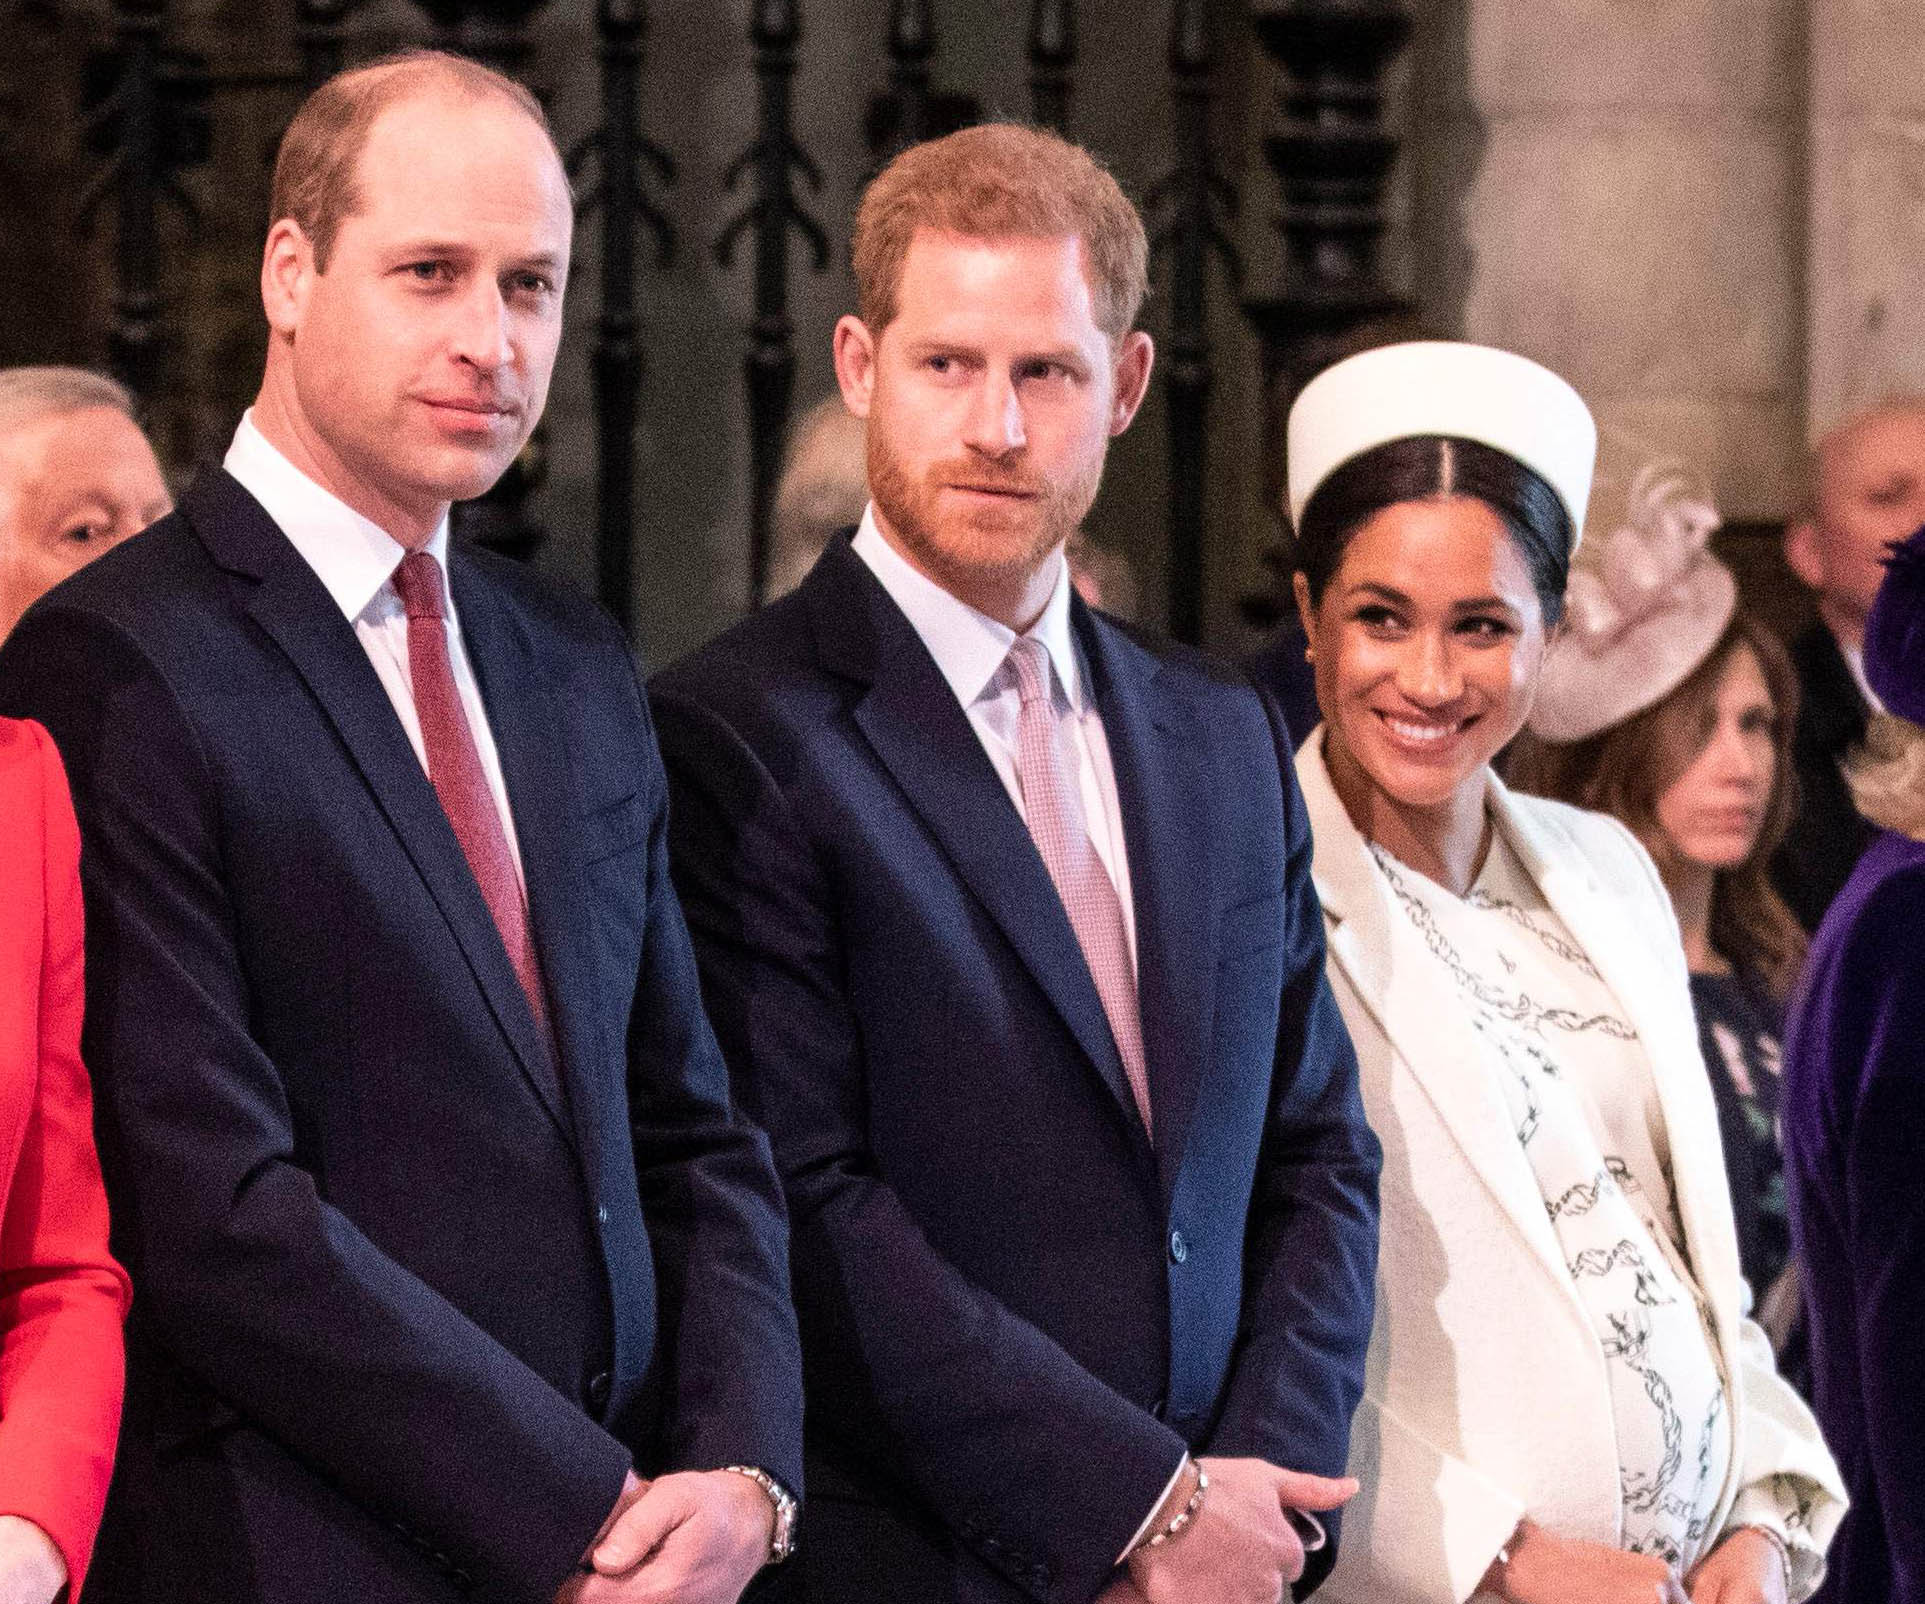 Prince William, Prince Harry and Duchess Meghan share their thoughts about the Covid-19 pandemic